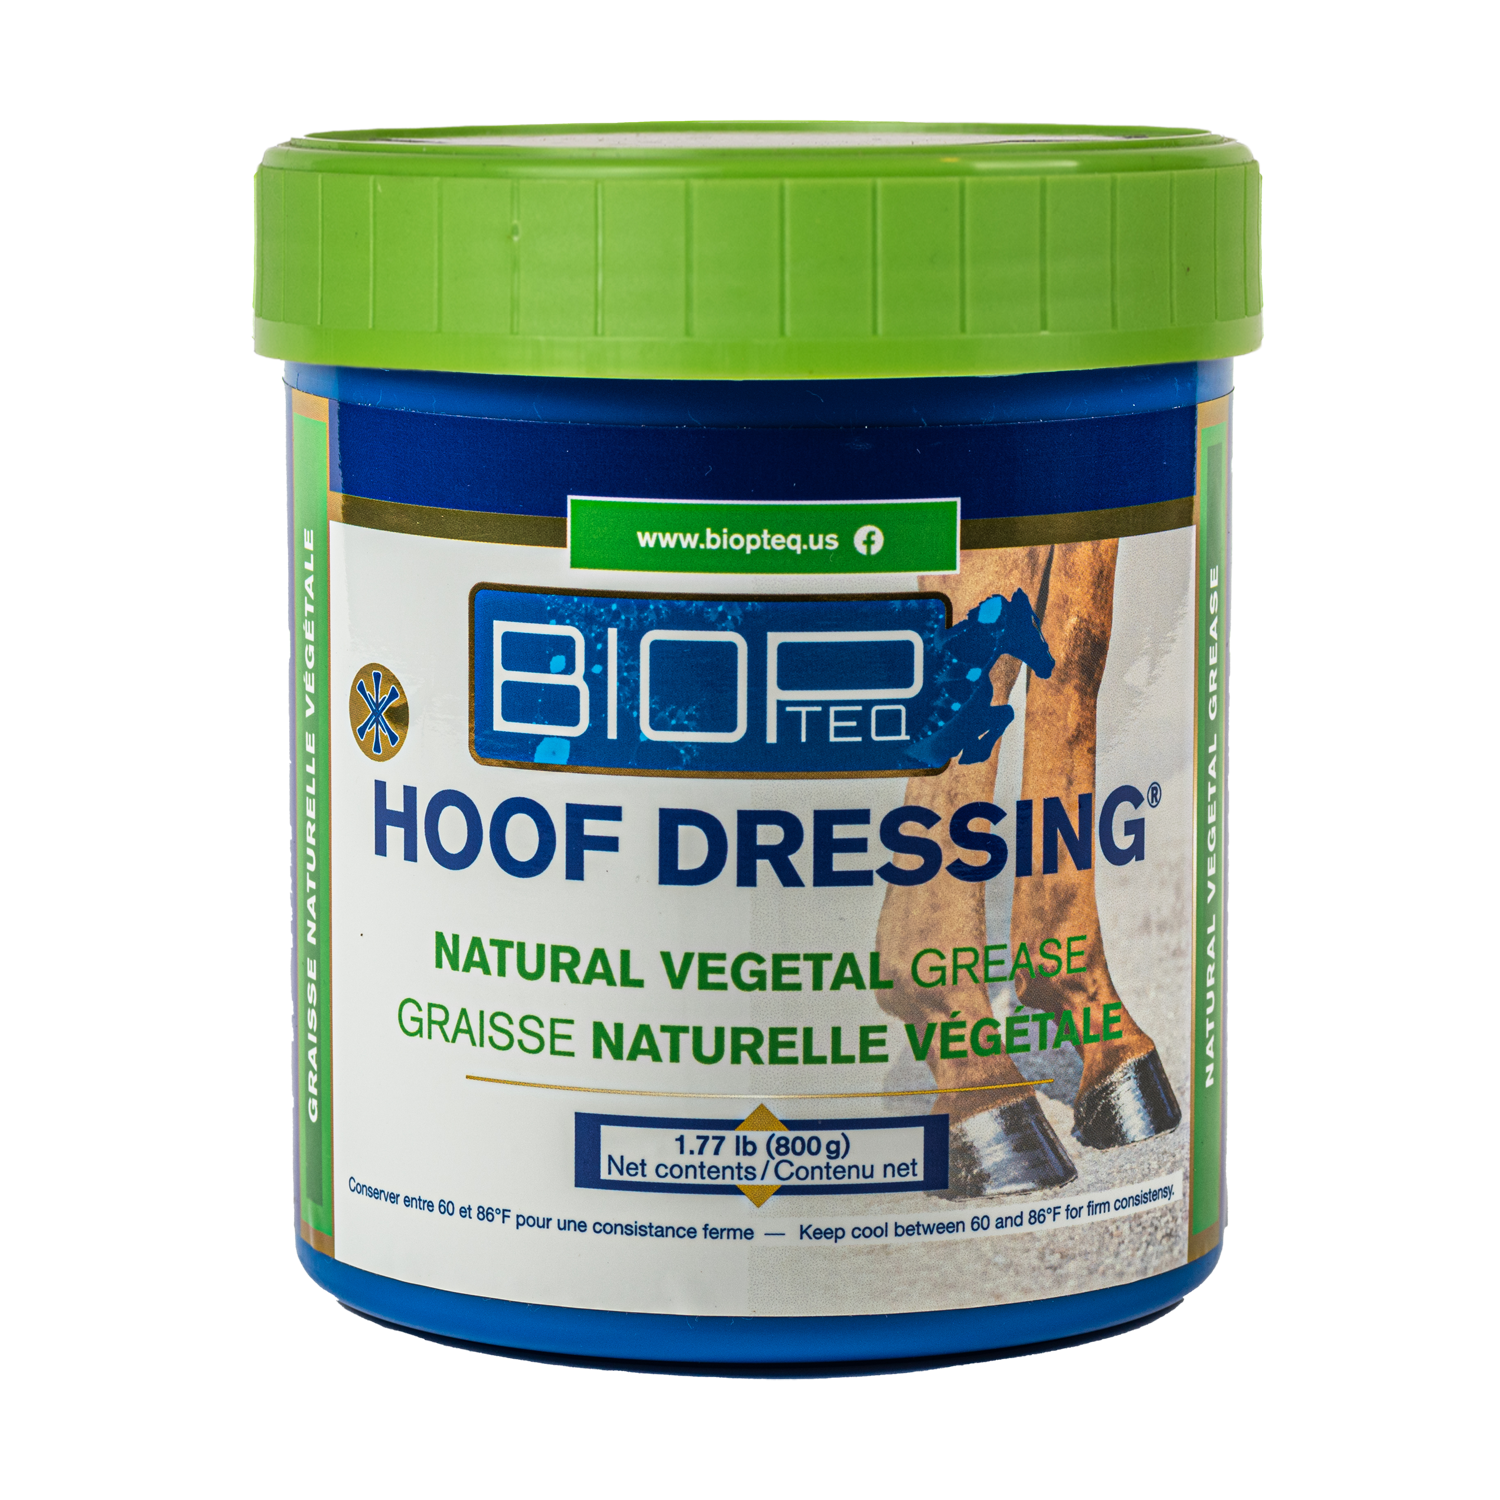 HOOF DRESSING© FOR USA MARKET ONLY